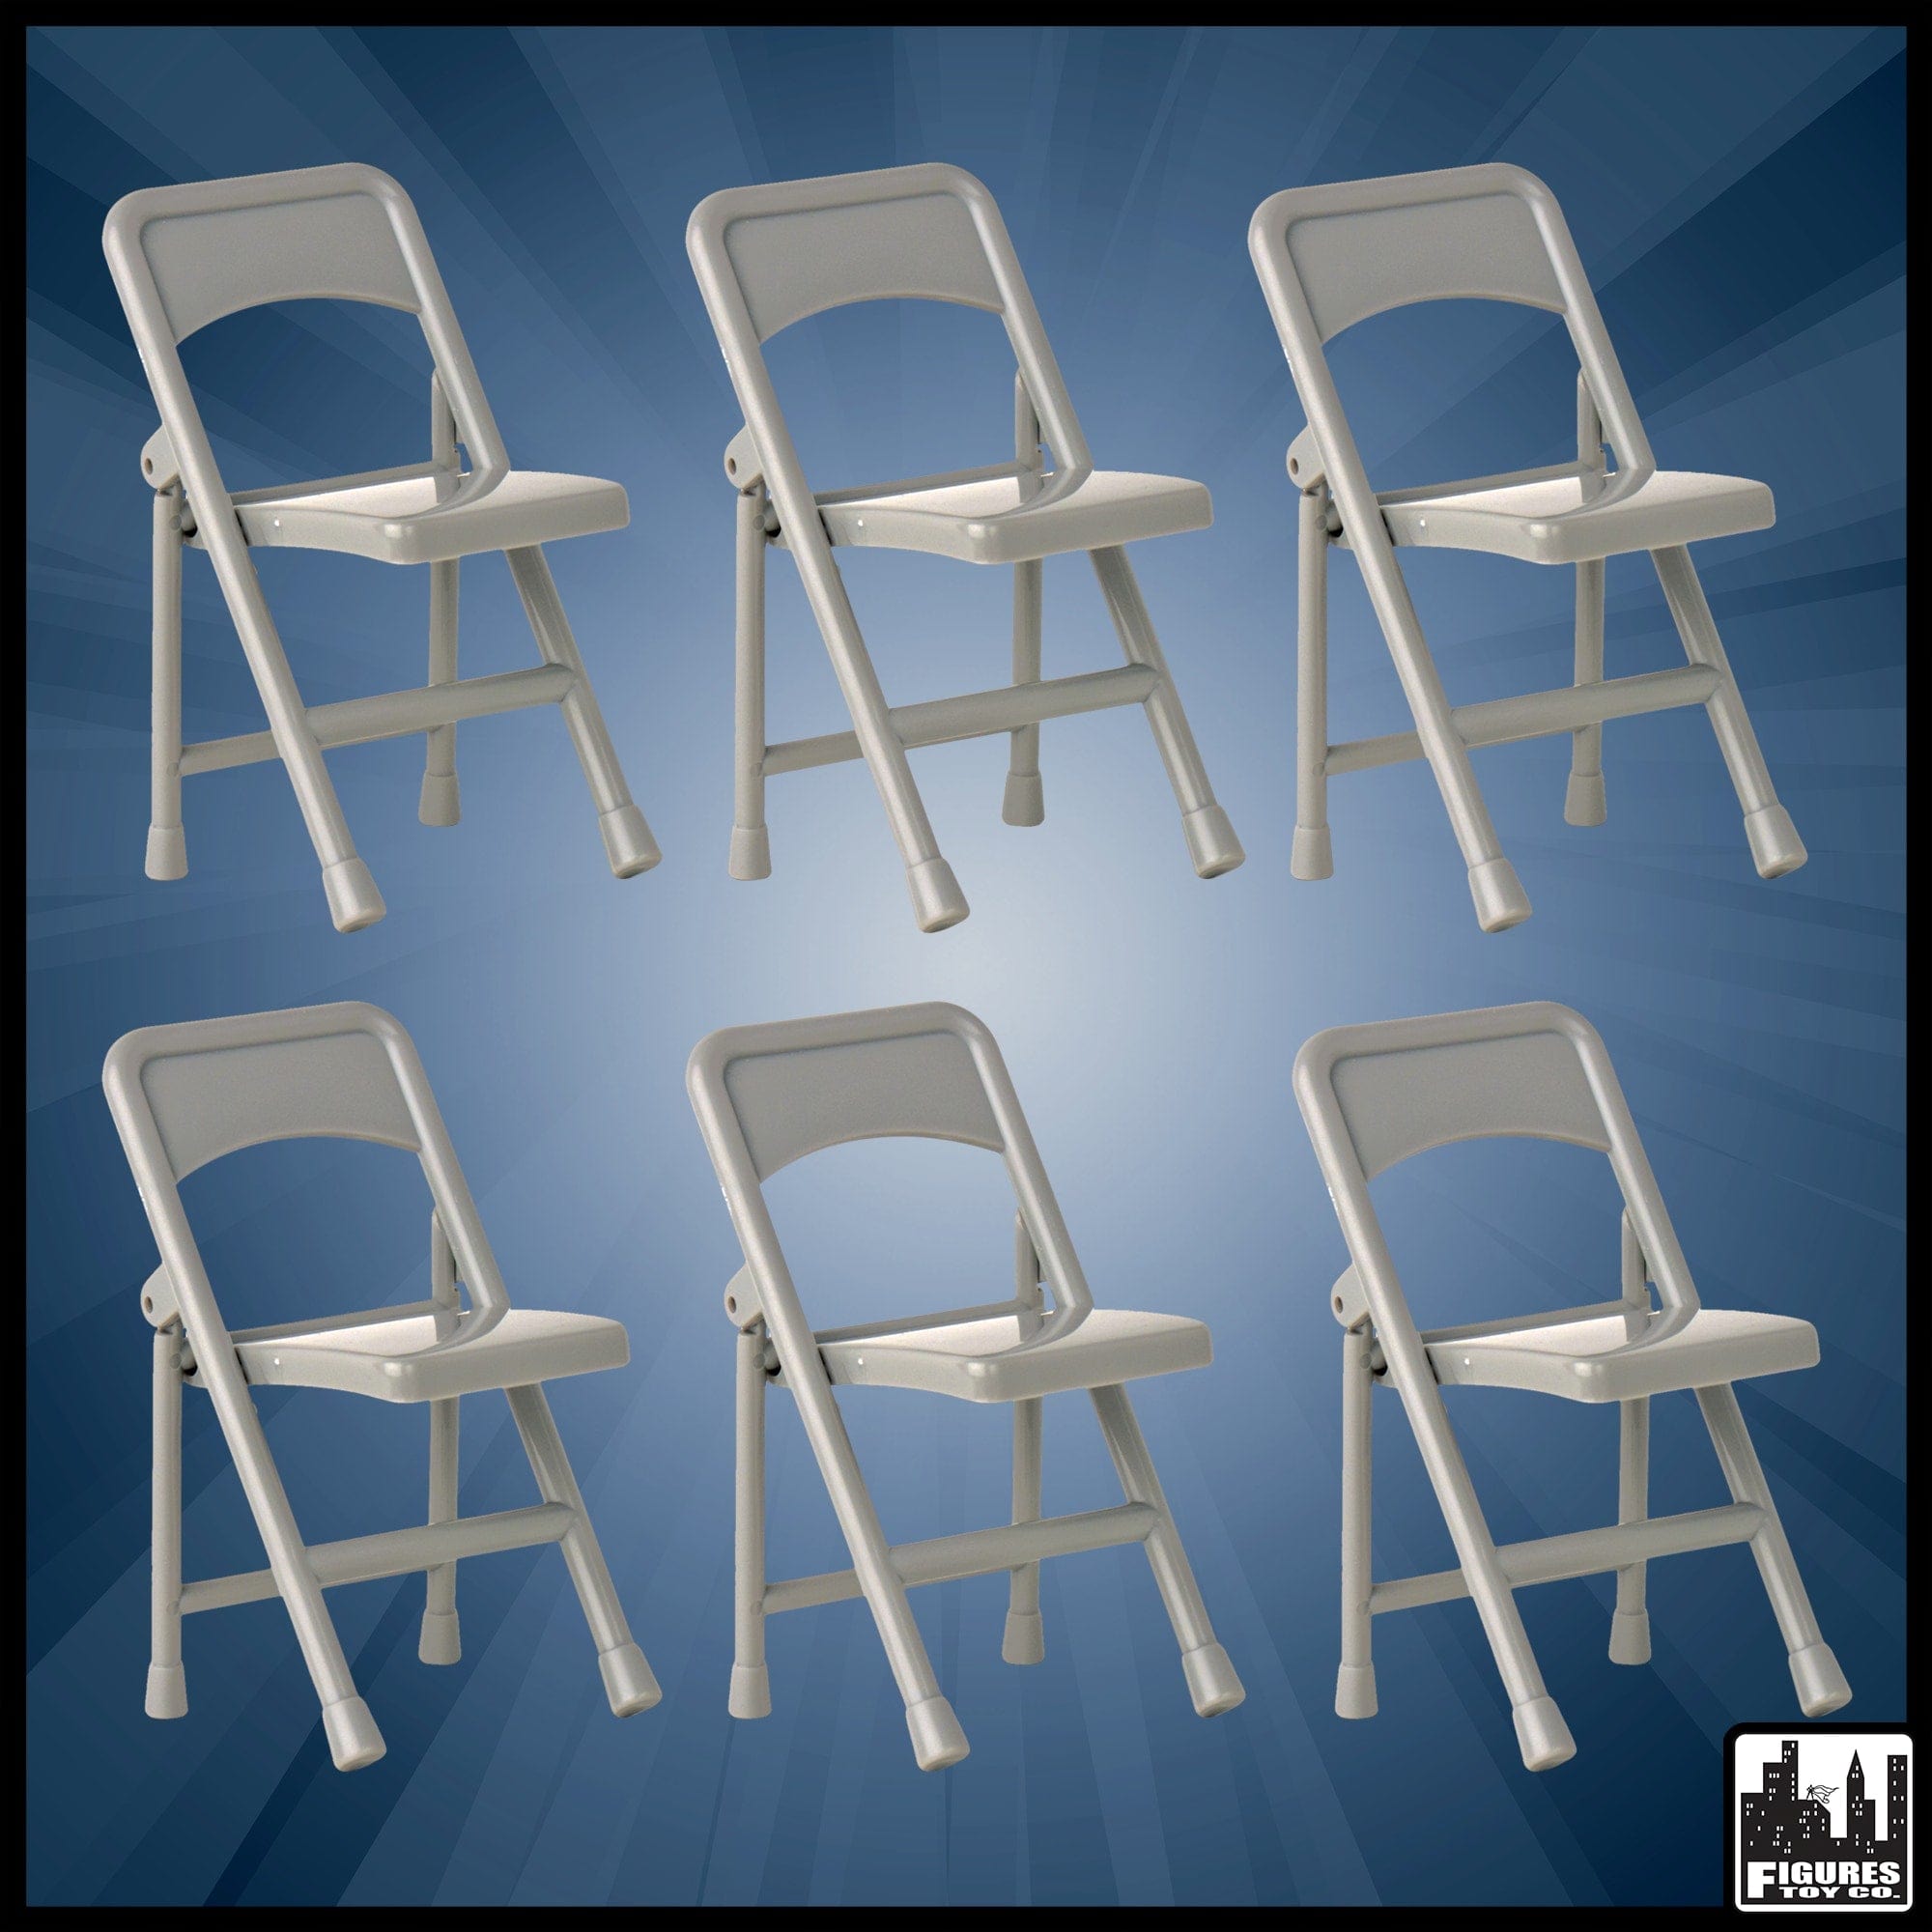 Set of 6 Gray Plastic Toy Folding Chairs for WWE Wrestling Action Figures